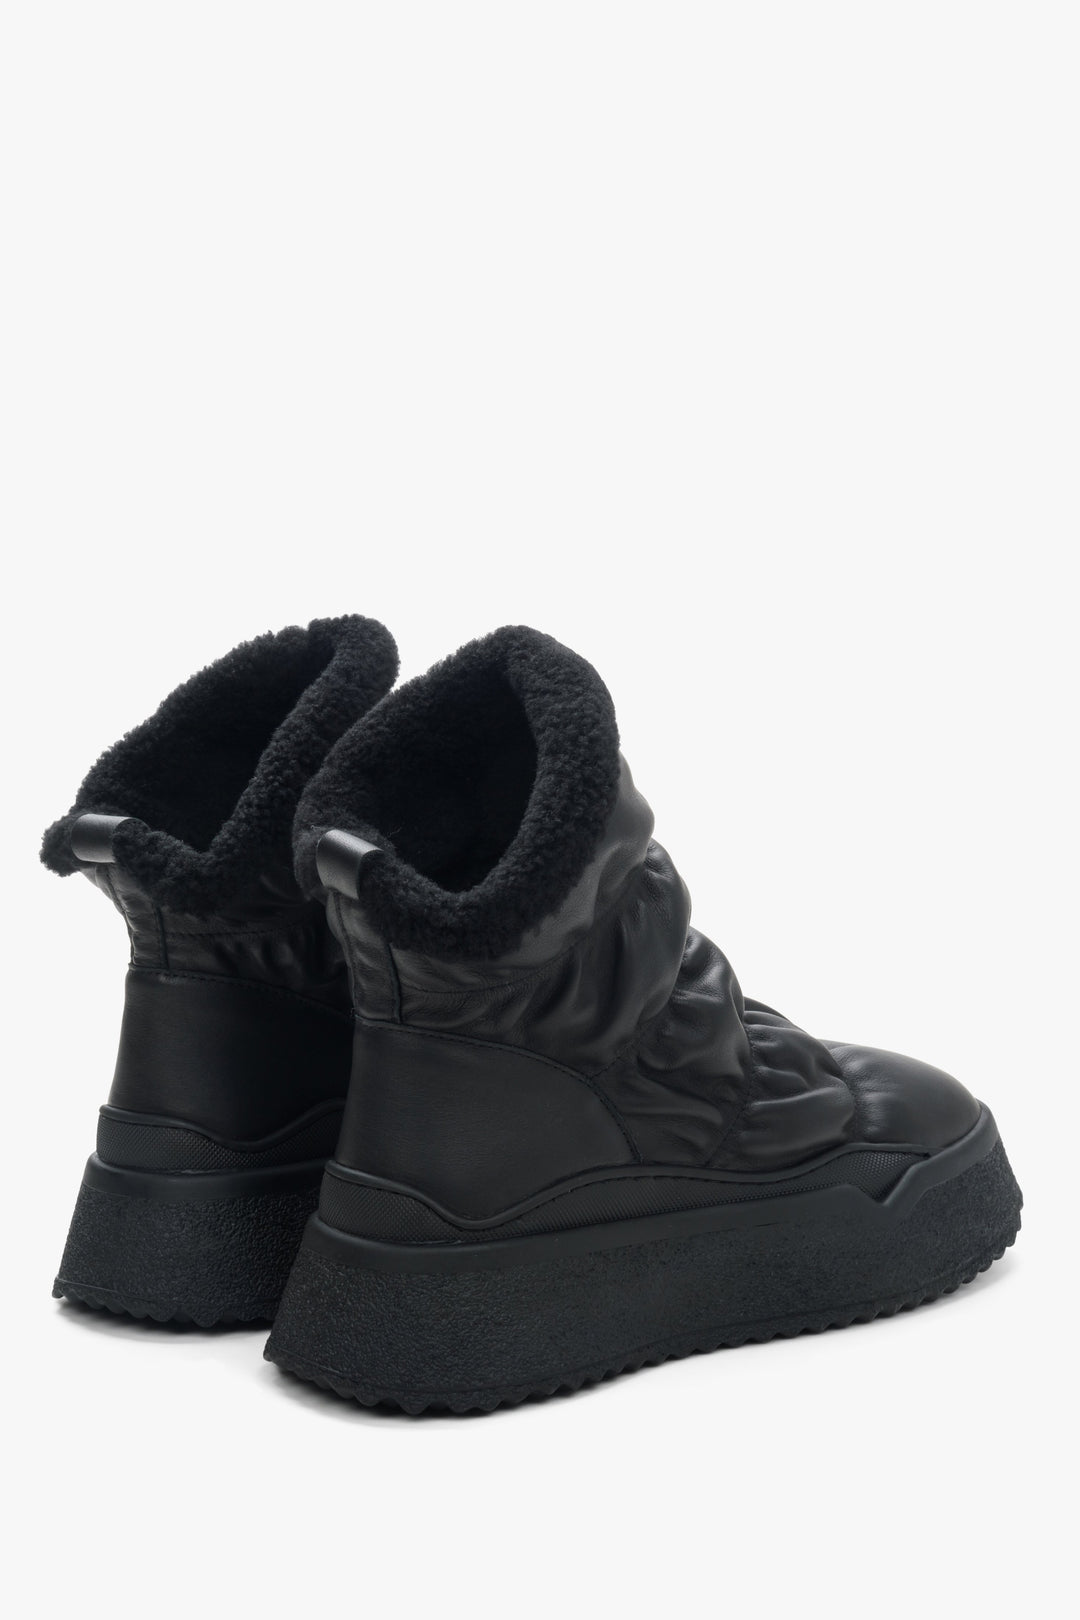 Women's black snow boots, fur lined - close-up on shoe sideline.